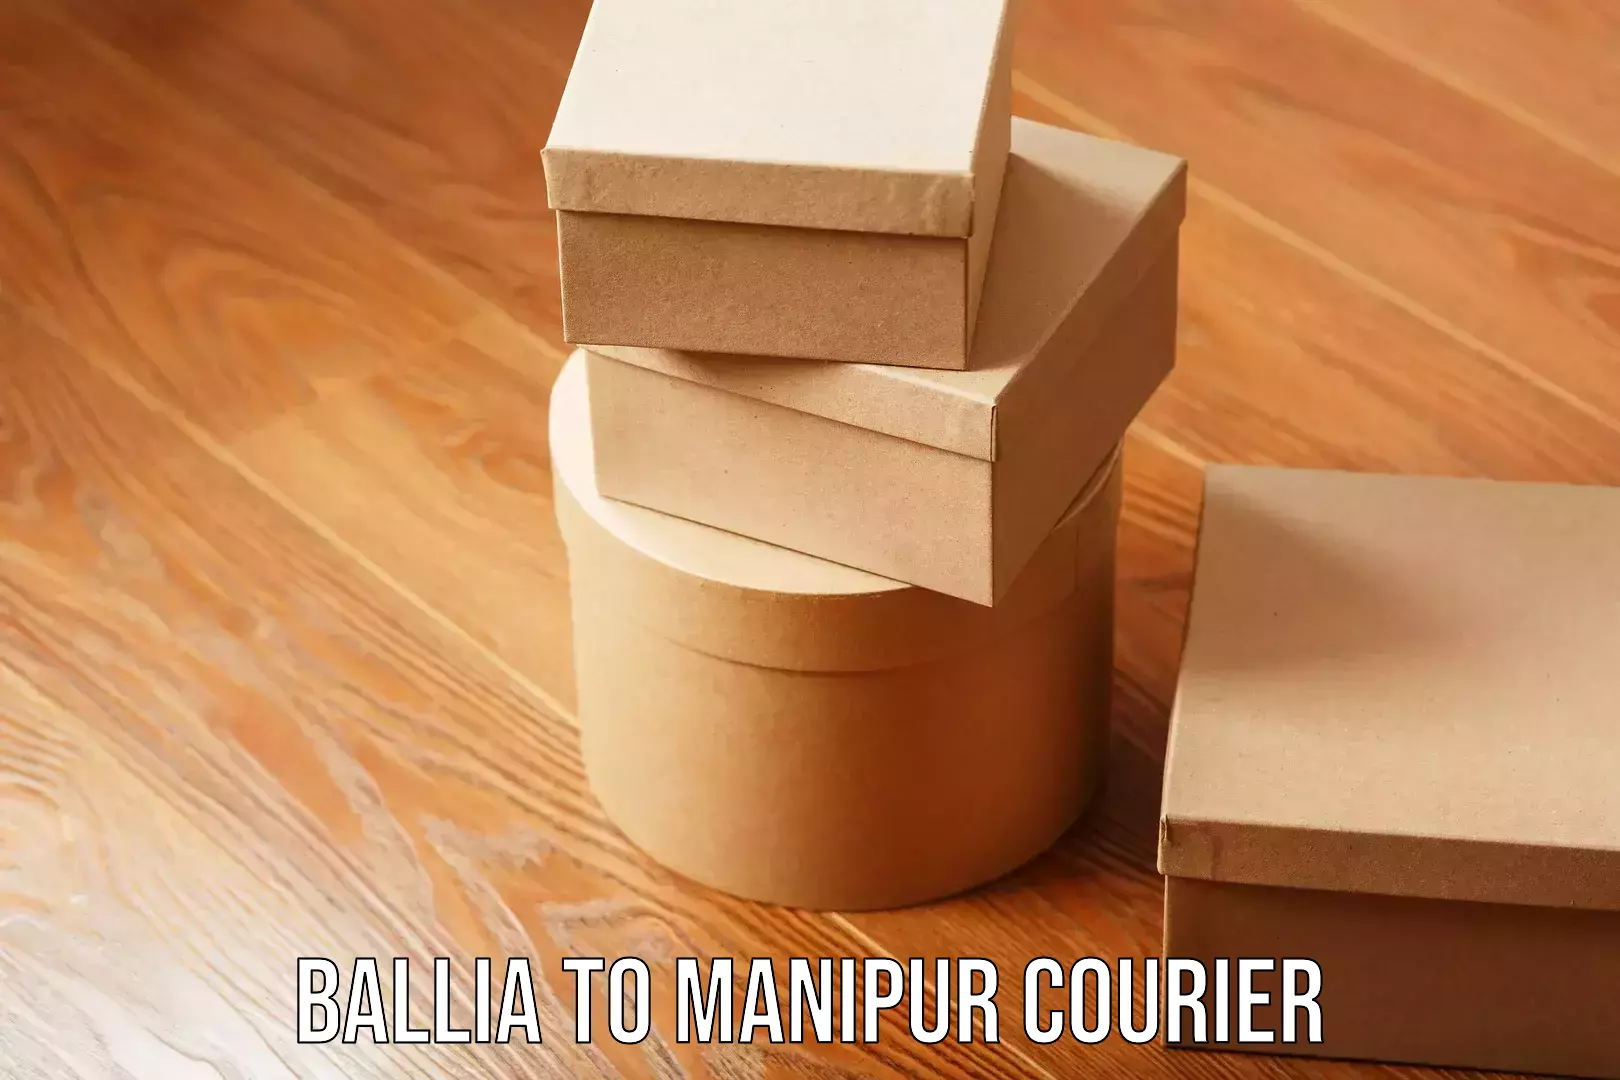 Cargo delivery service Ballia to Manipur